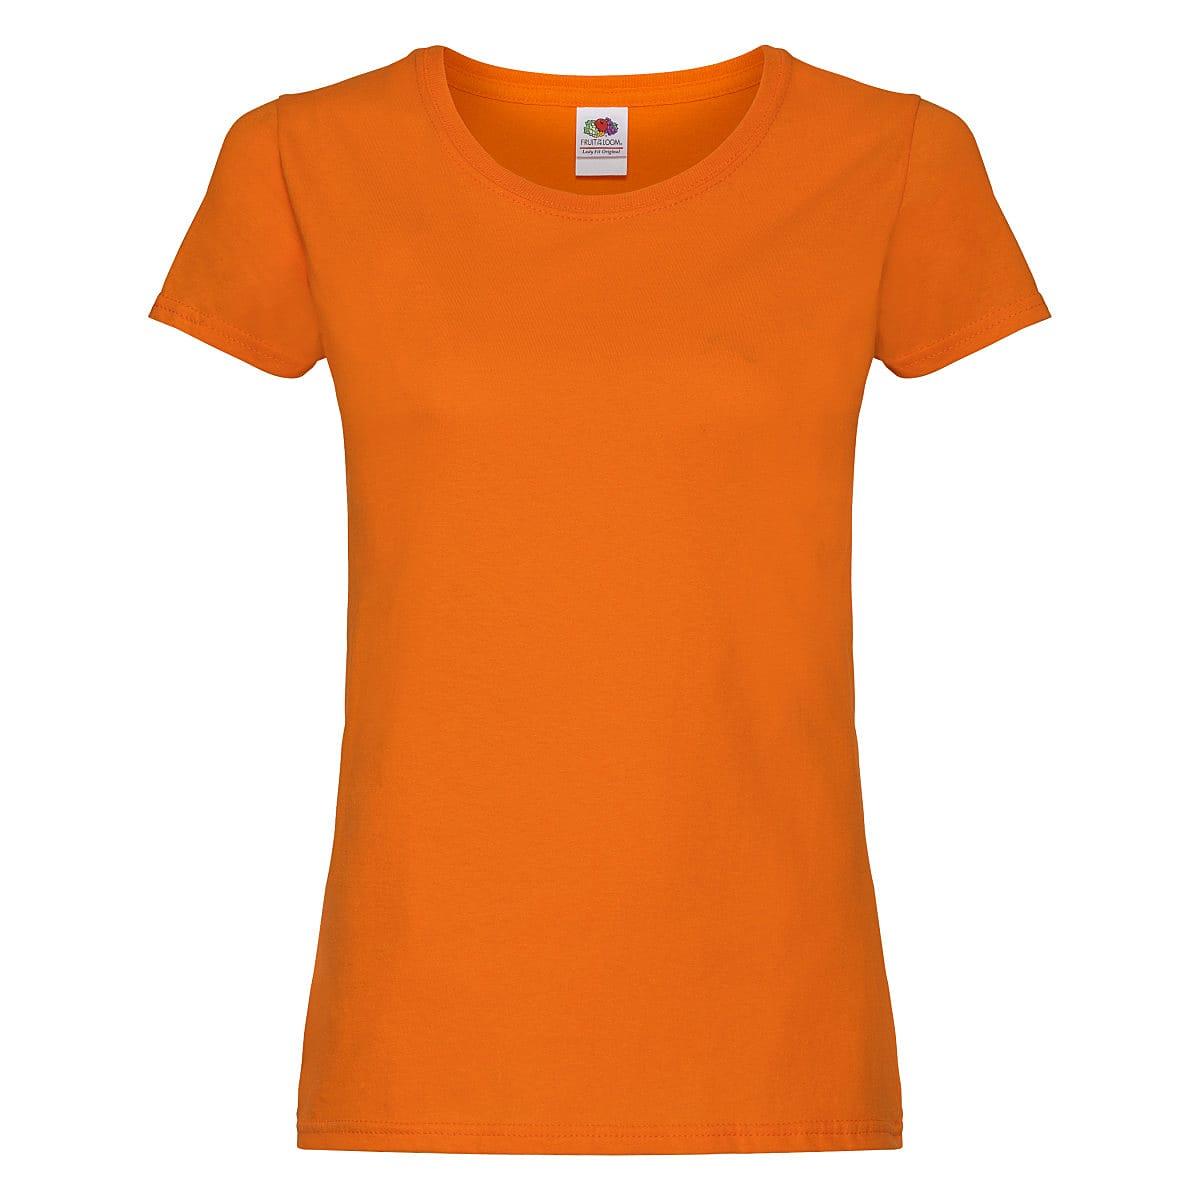 Fruit Of The Loom Lady Fit Original T-Shirt in Orange (Product Code: 61420)